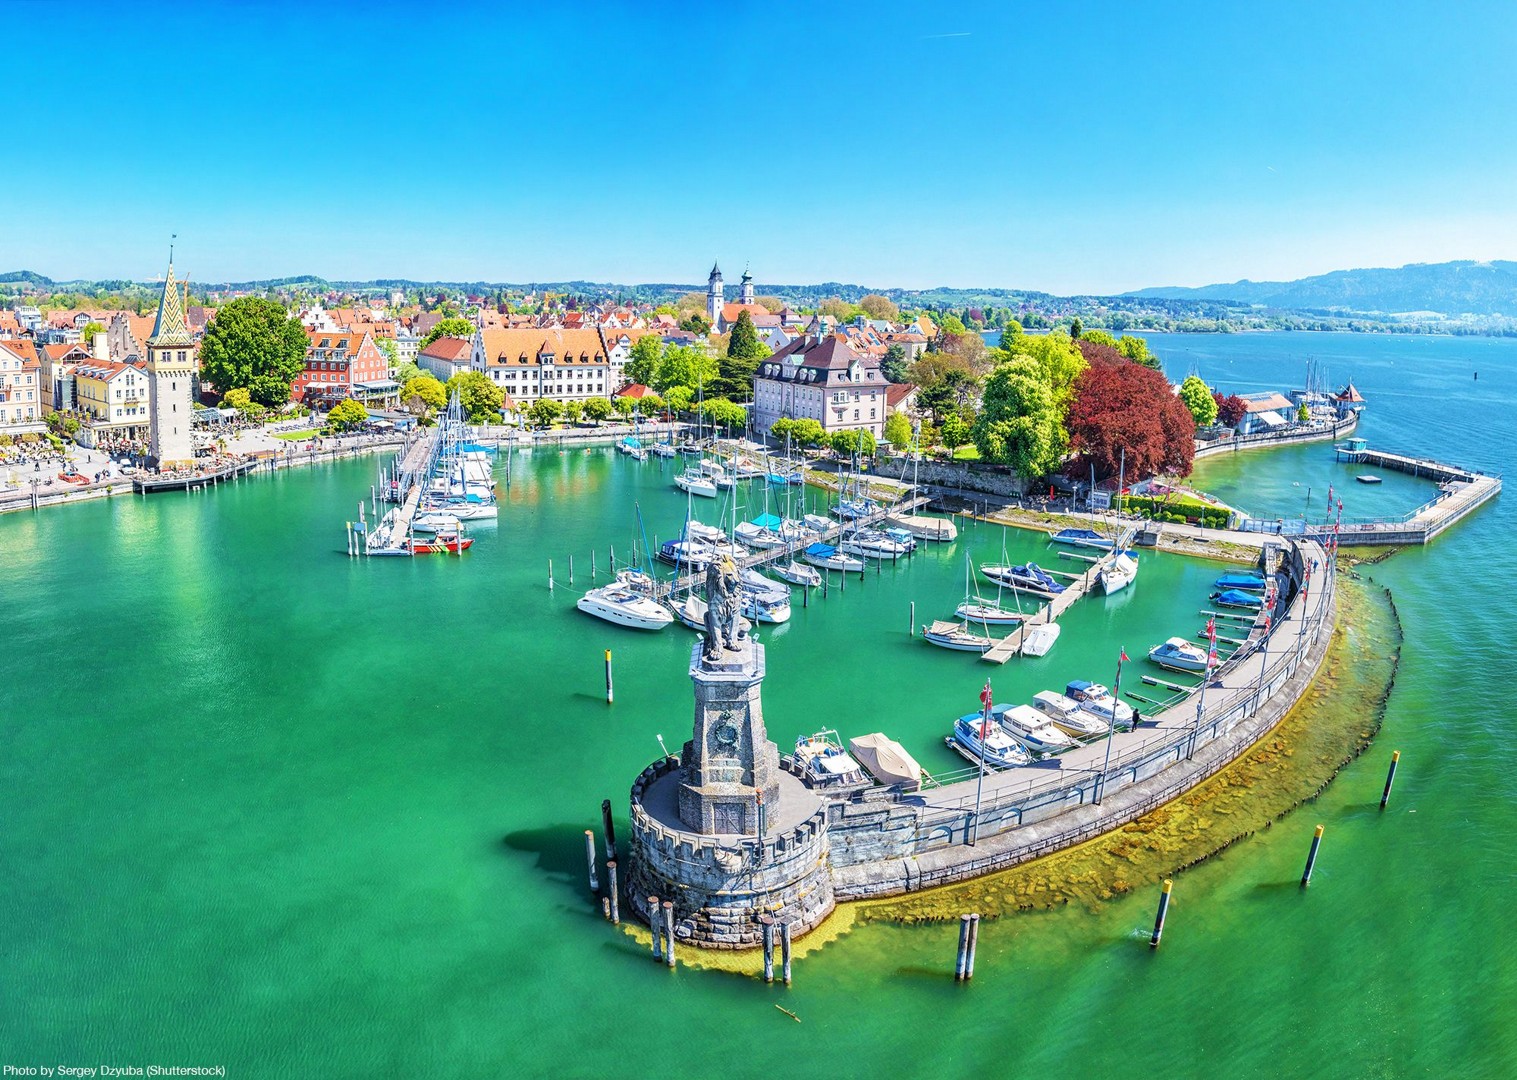 lake constance cycling holiday off 75% - cavirtual.in